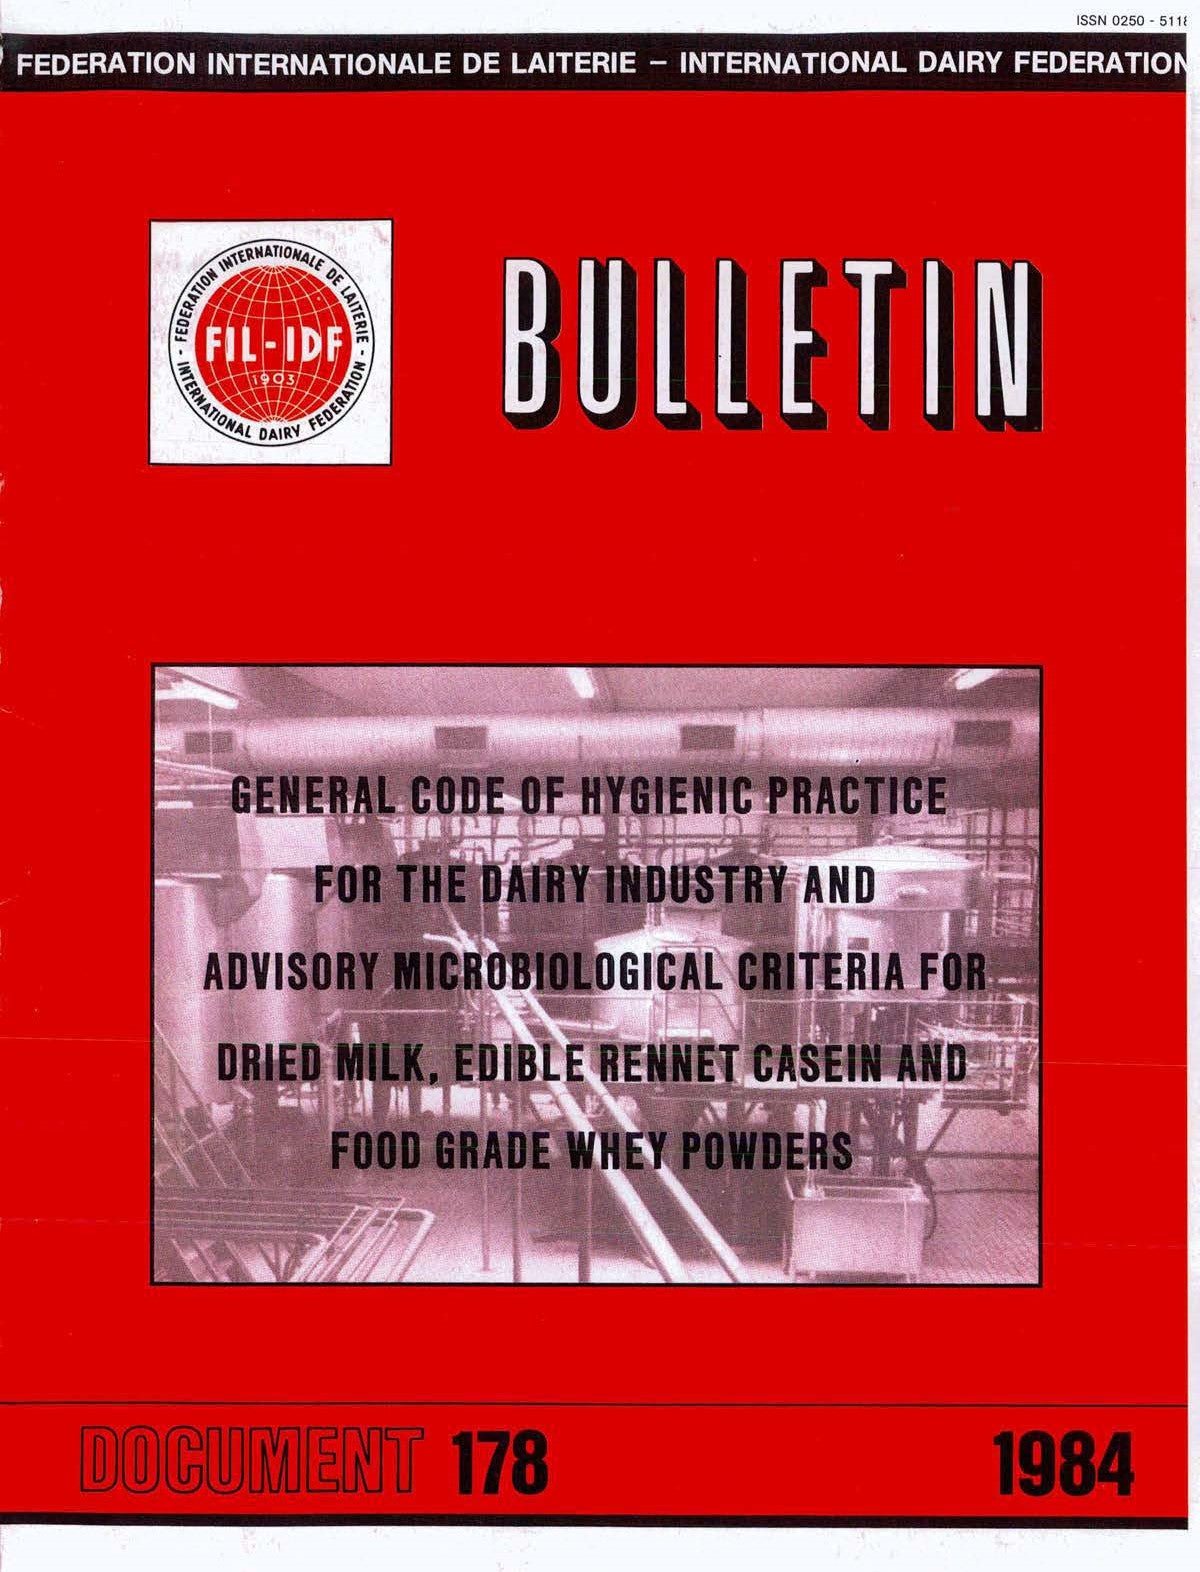 Bulletin of the IDF N° 178/1984 - General Code of hygienic practice for the dairy industry & advisory microbiological criteria for dried milk, edible rennet casein & food grade whey powders - FIL-IDF